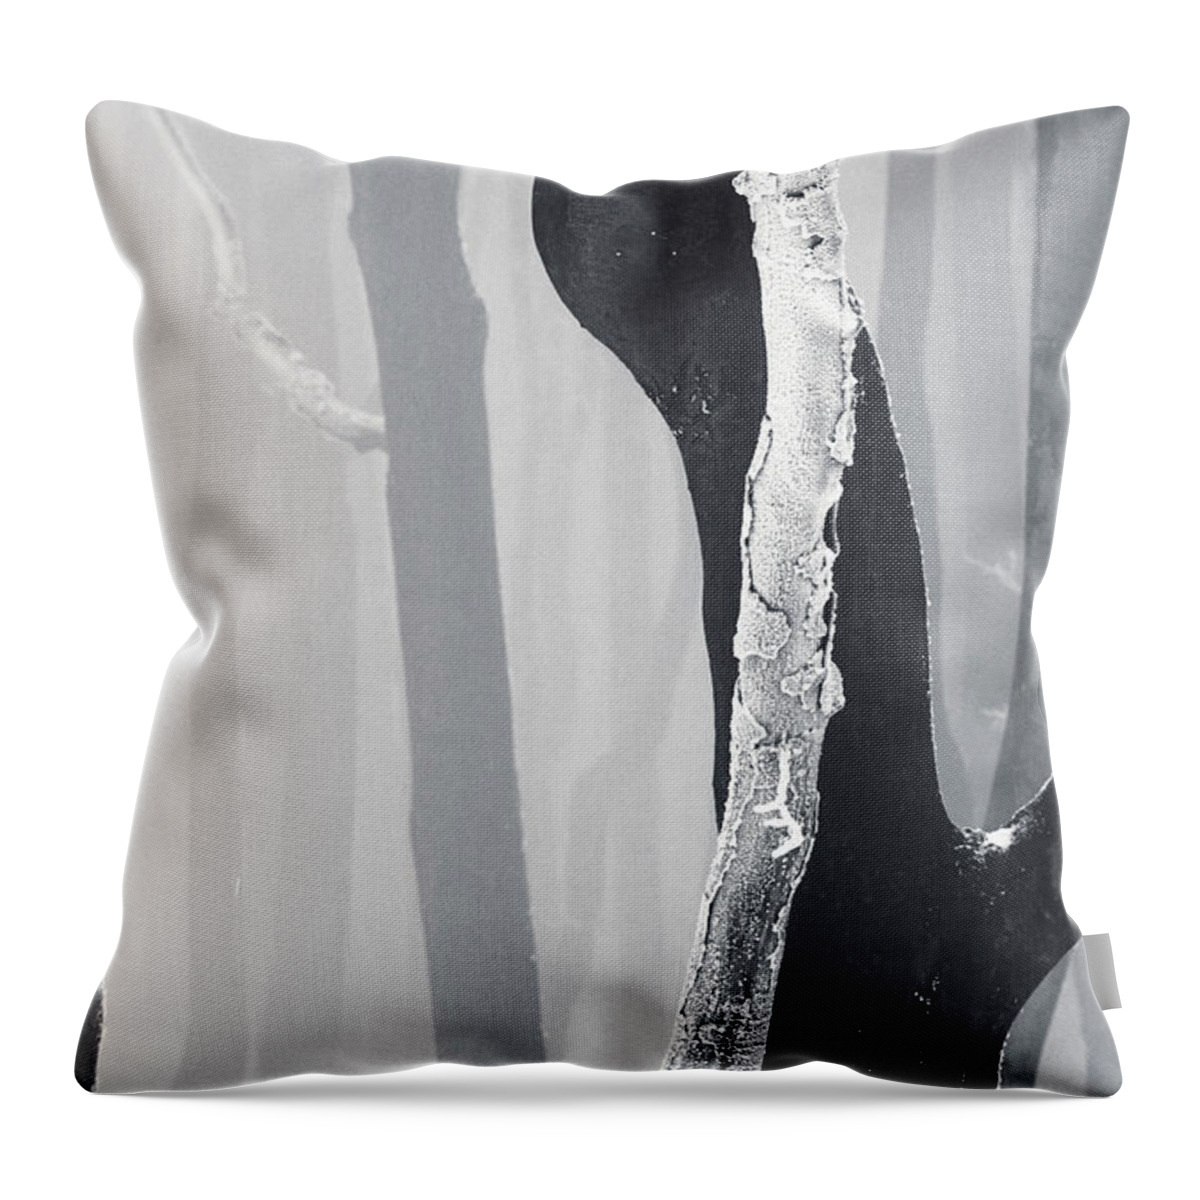 Mountain Throw Pillow featuring the photograph In Love by Evgeni Dinev